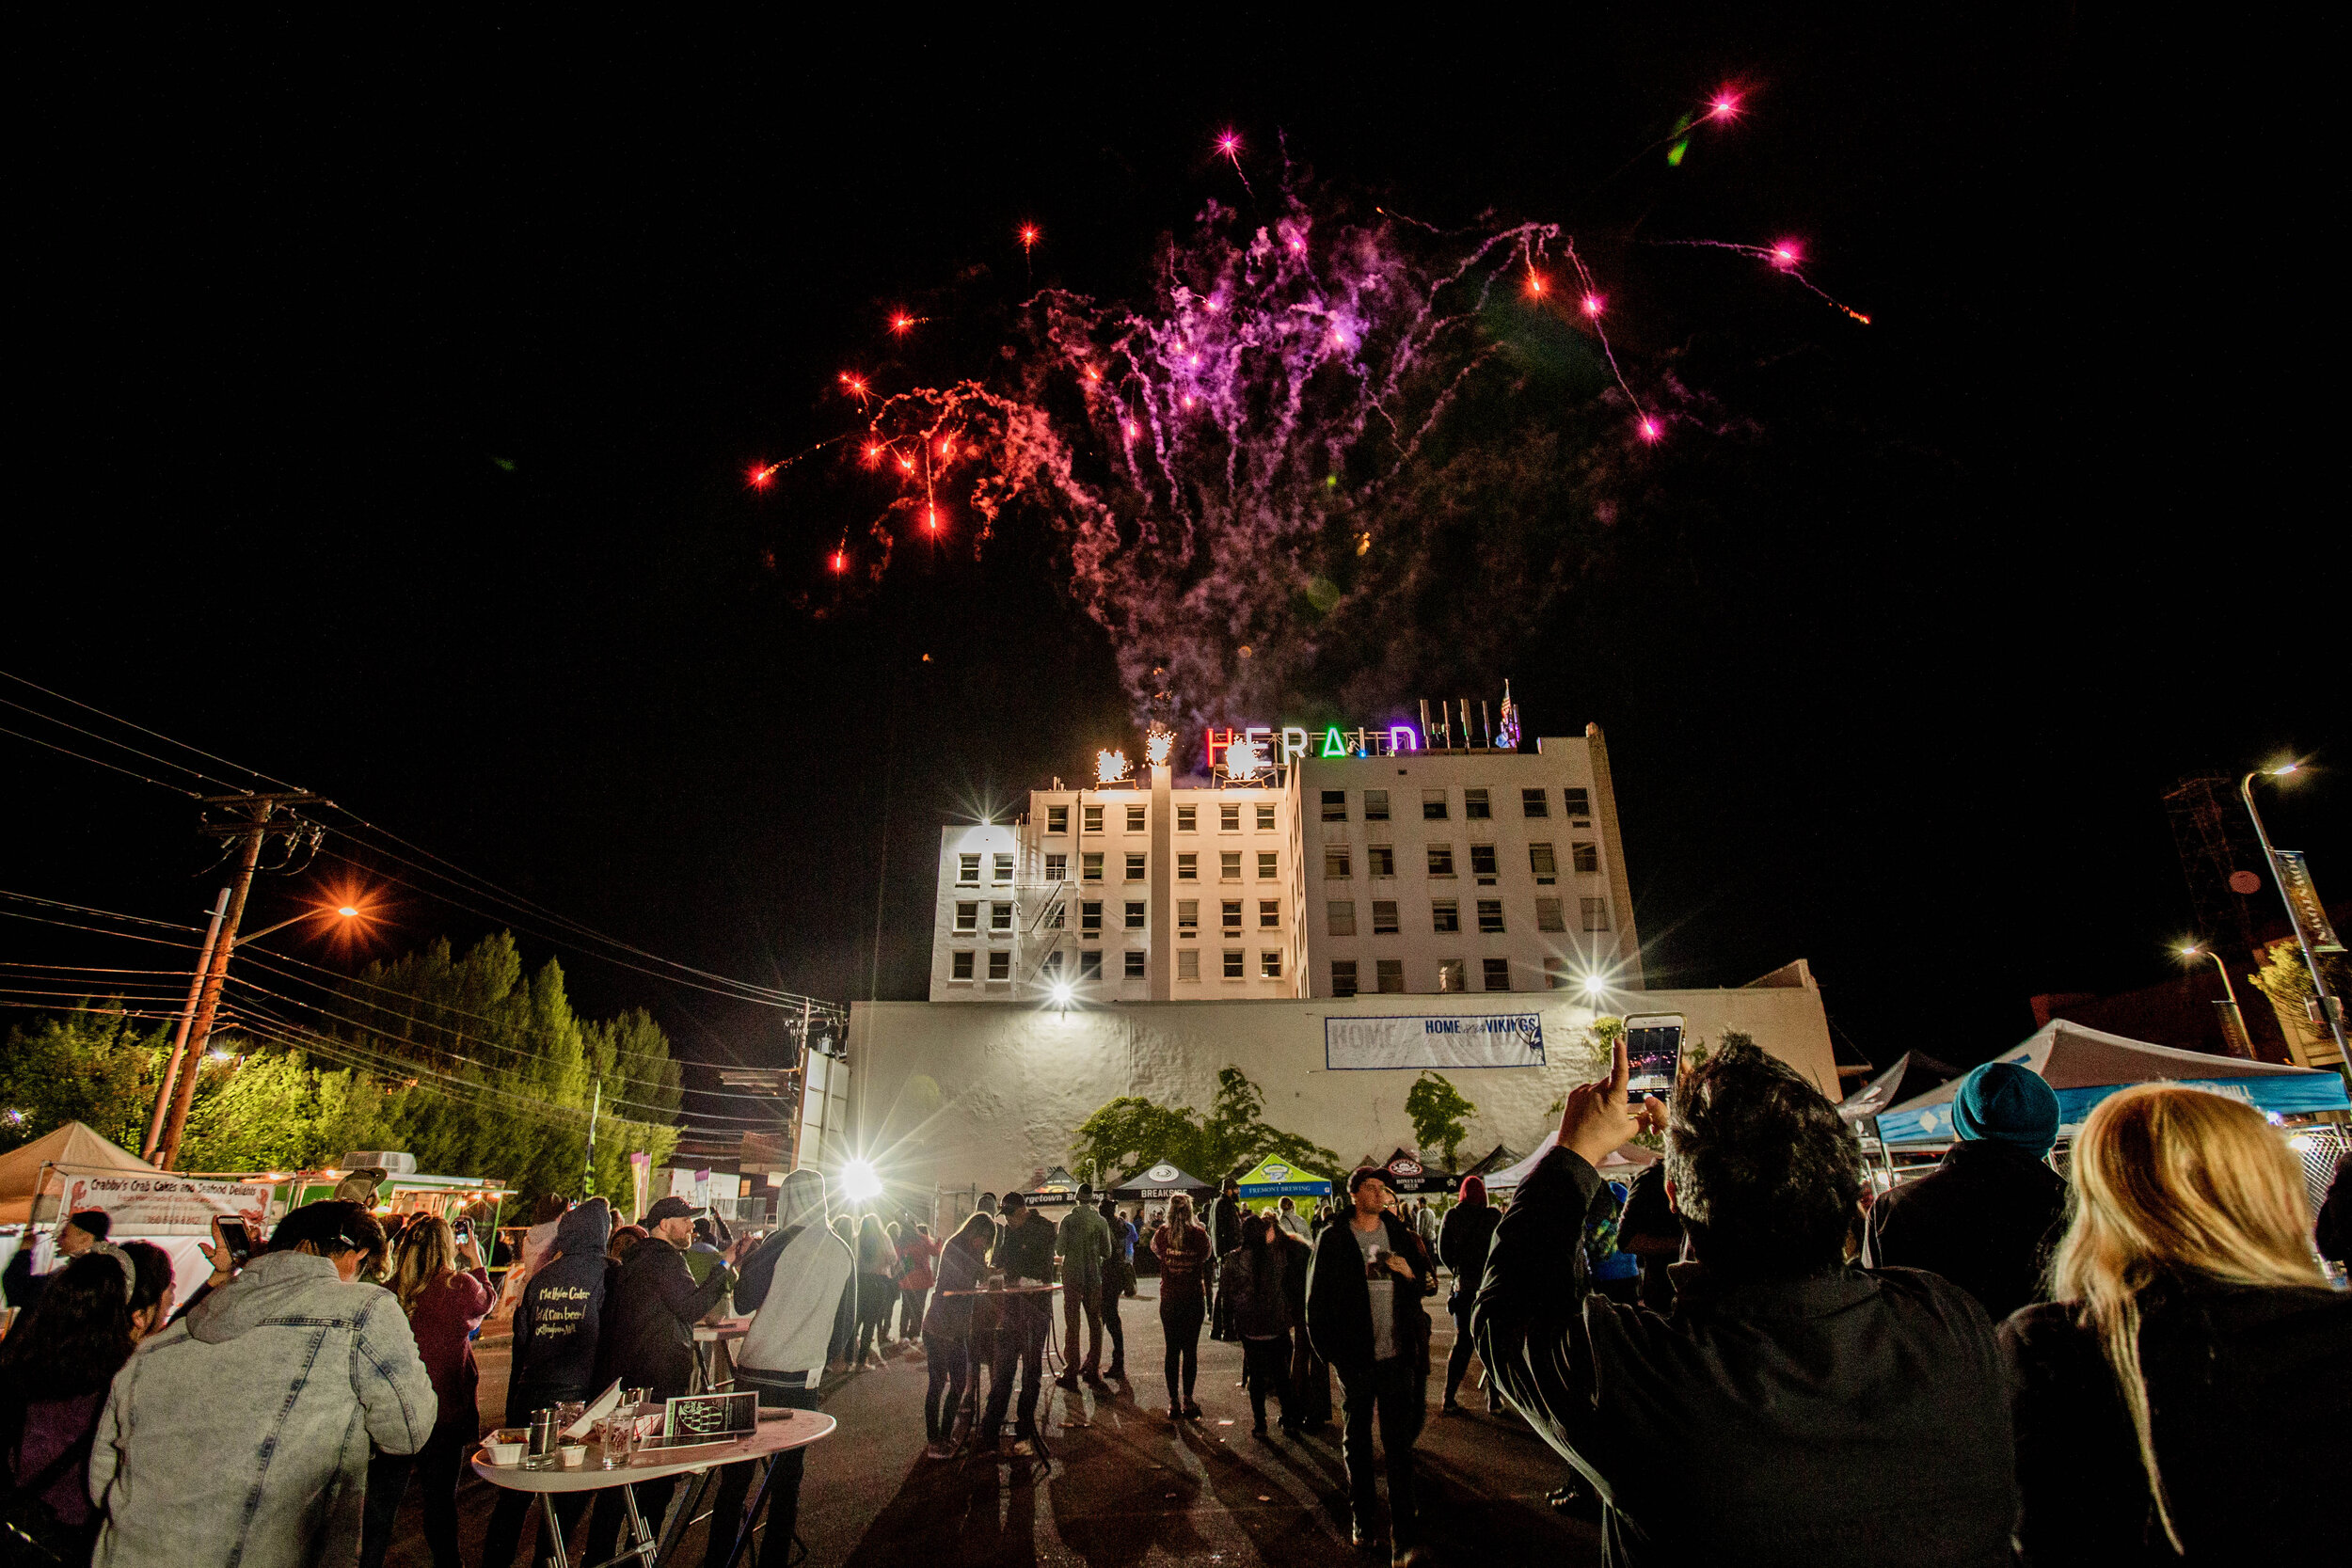 An image of a crowd gathered in Bellingham's downtown market square, watching fireworks explode over the iconic Herald sign.